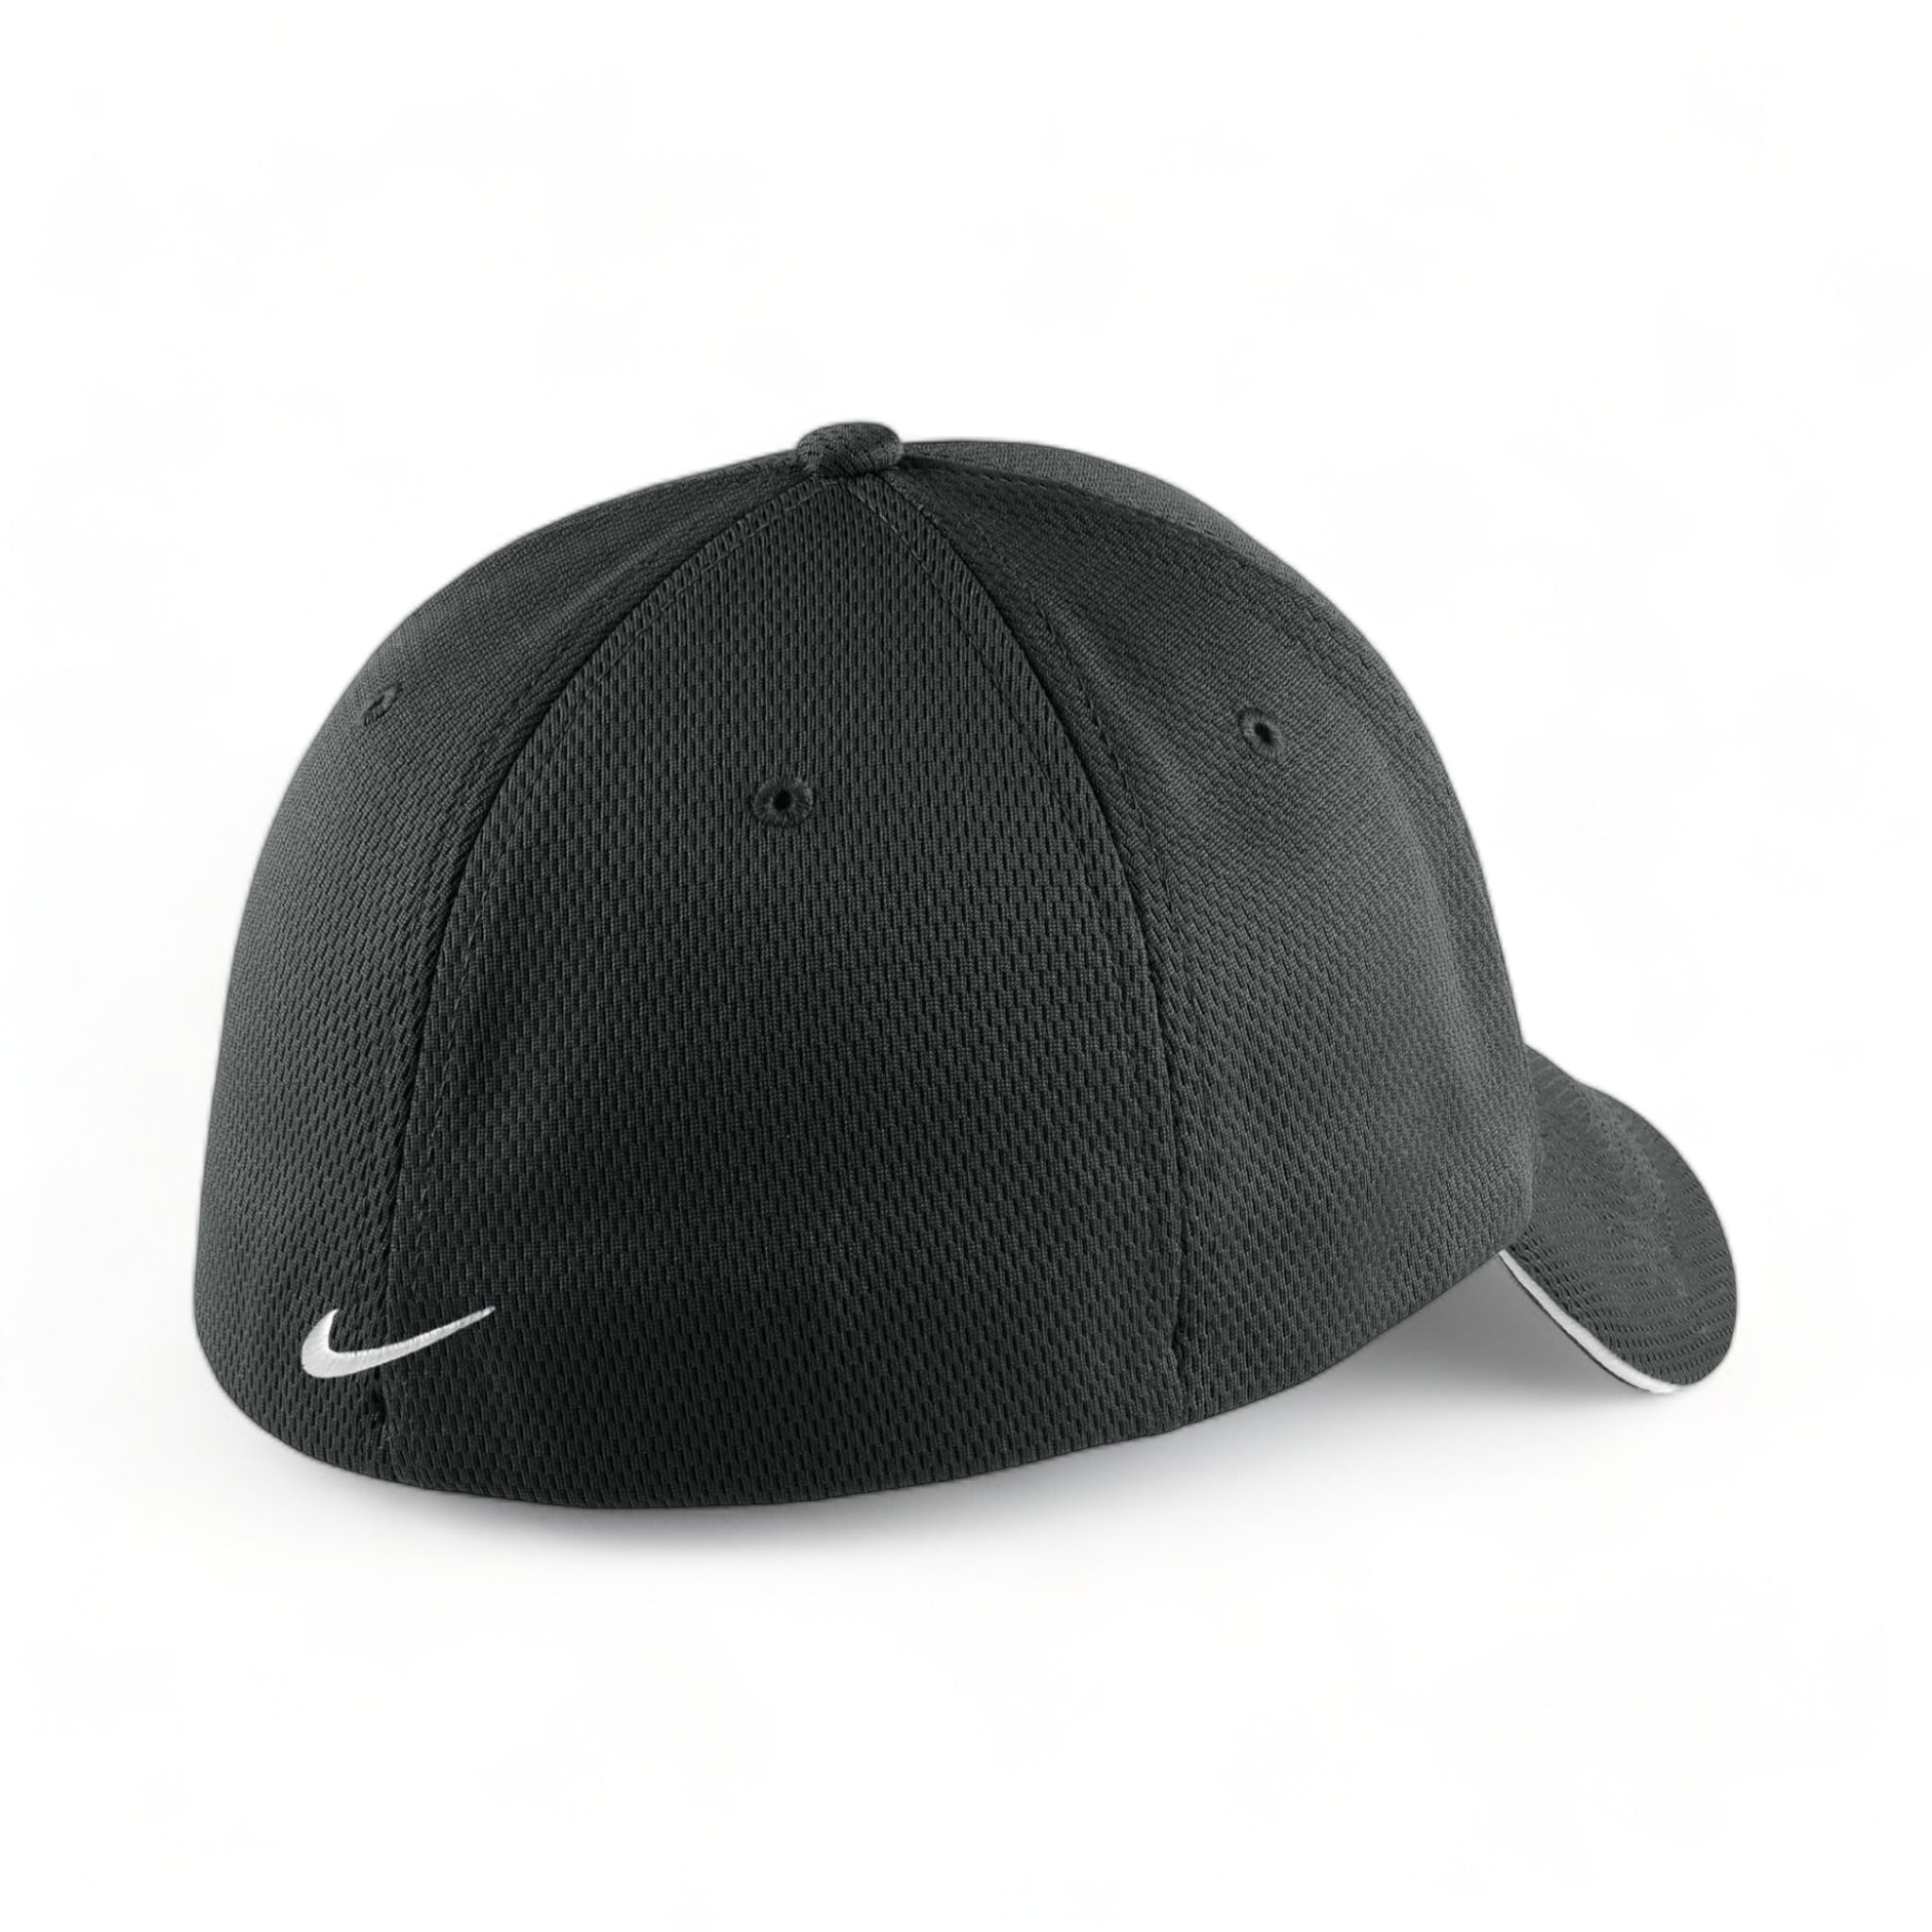 Back view of Nike NKFD9718 custom hat in anthracite and white